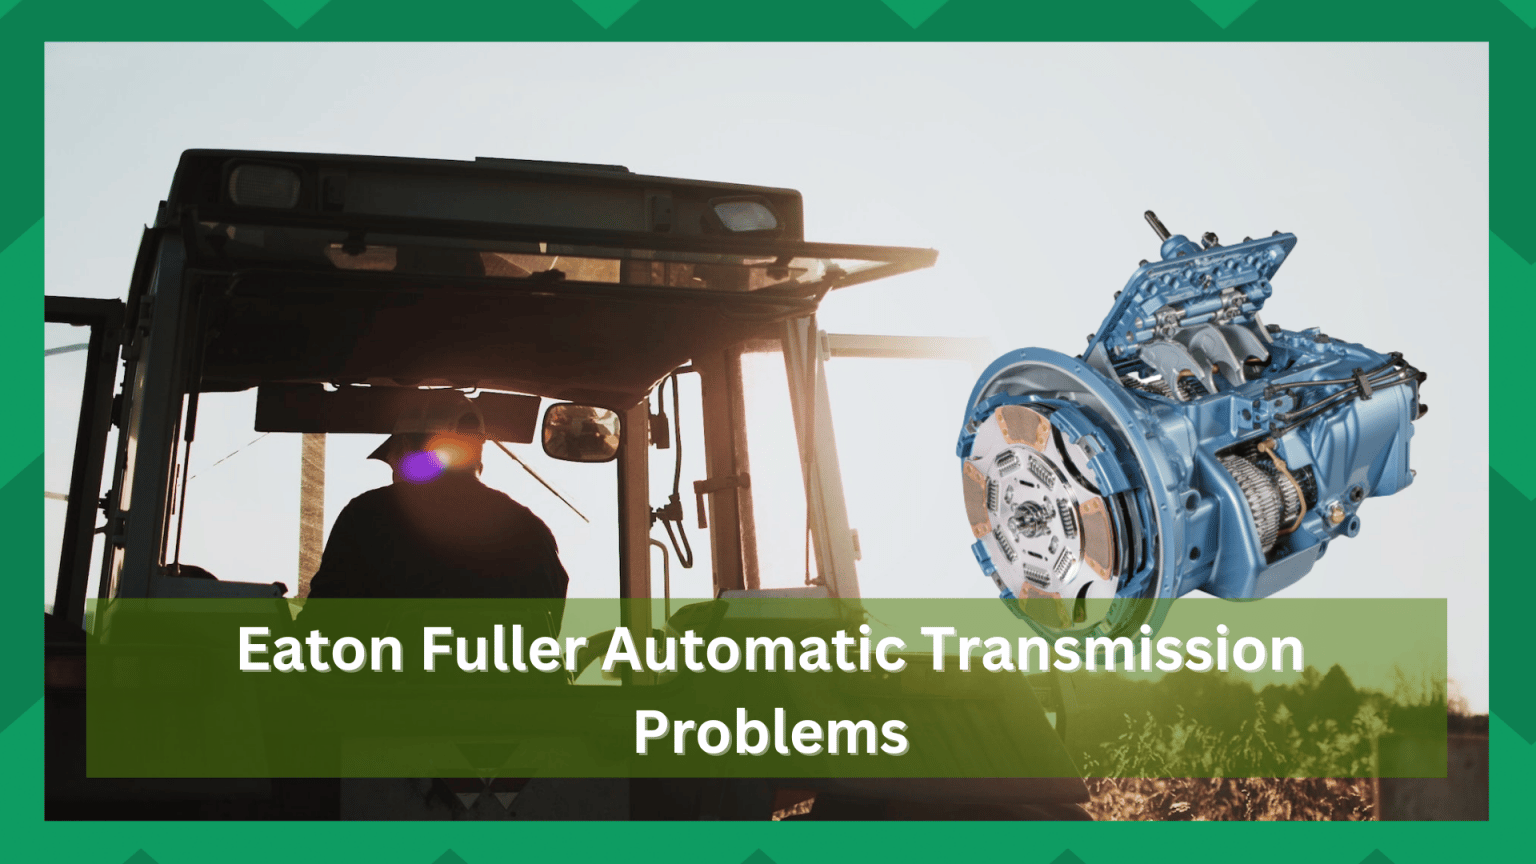 10 Easy Fixes For Eaton Fuller Automatic Transmission Problems Farmer